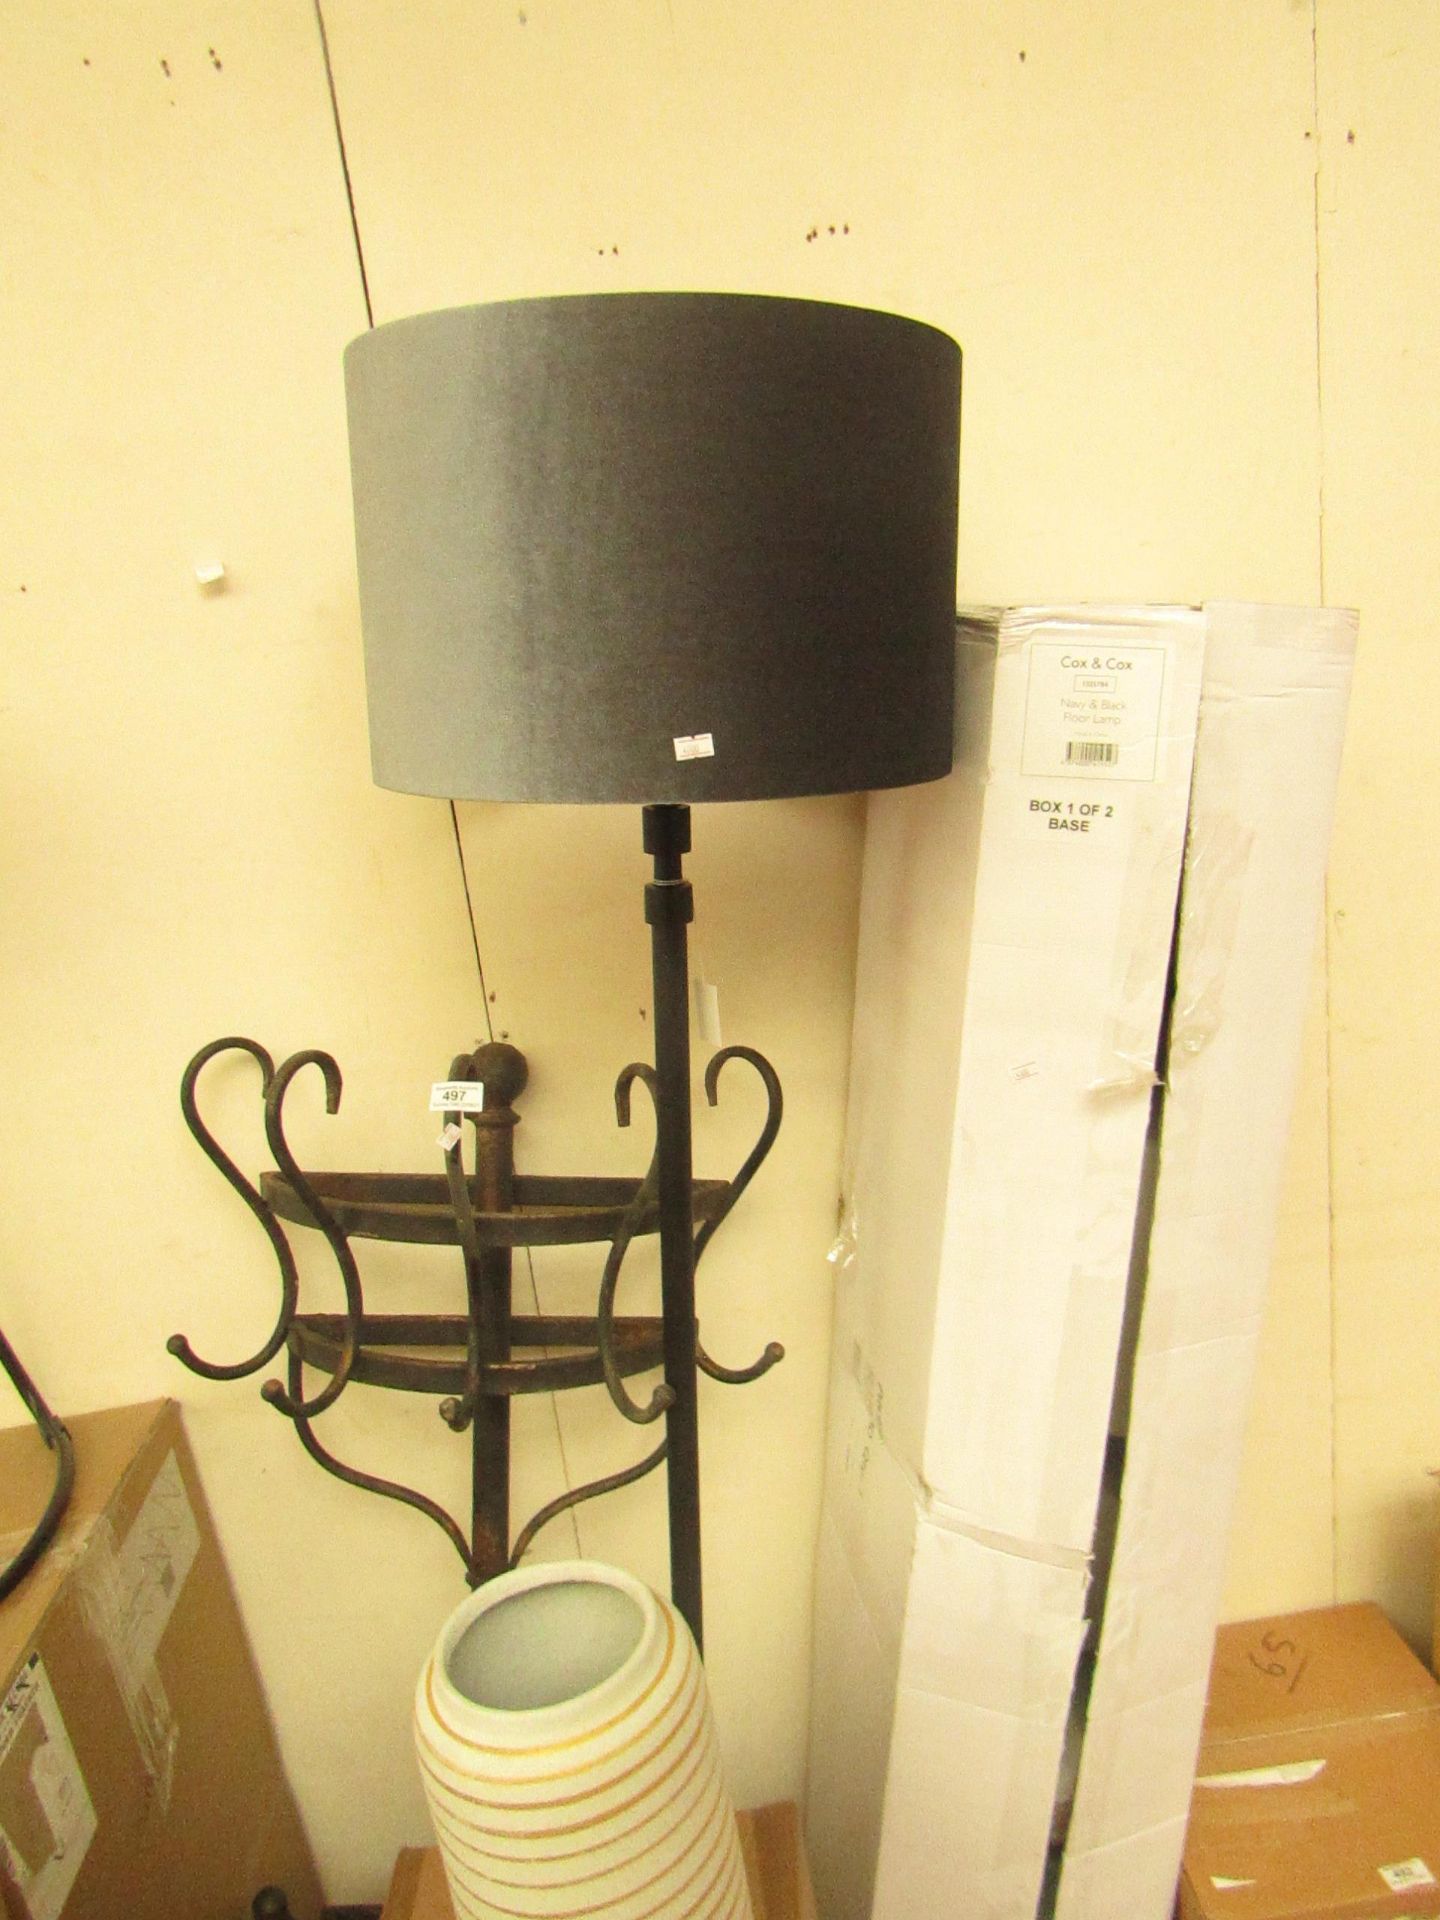 | 1X | COX & COX NAVY AND BLACK FLOOR LAMP, UNCHECKED AND BOXED | RRP £250 |